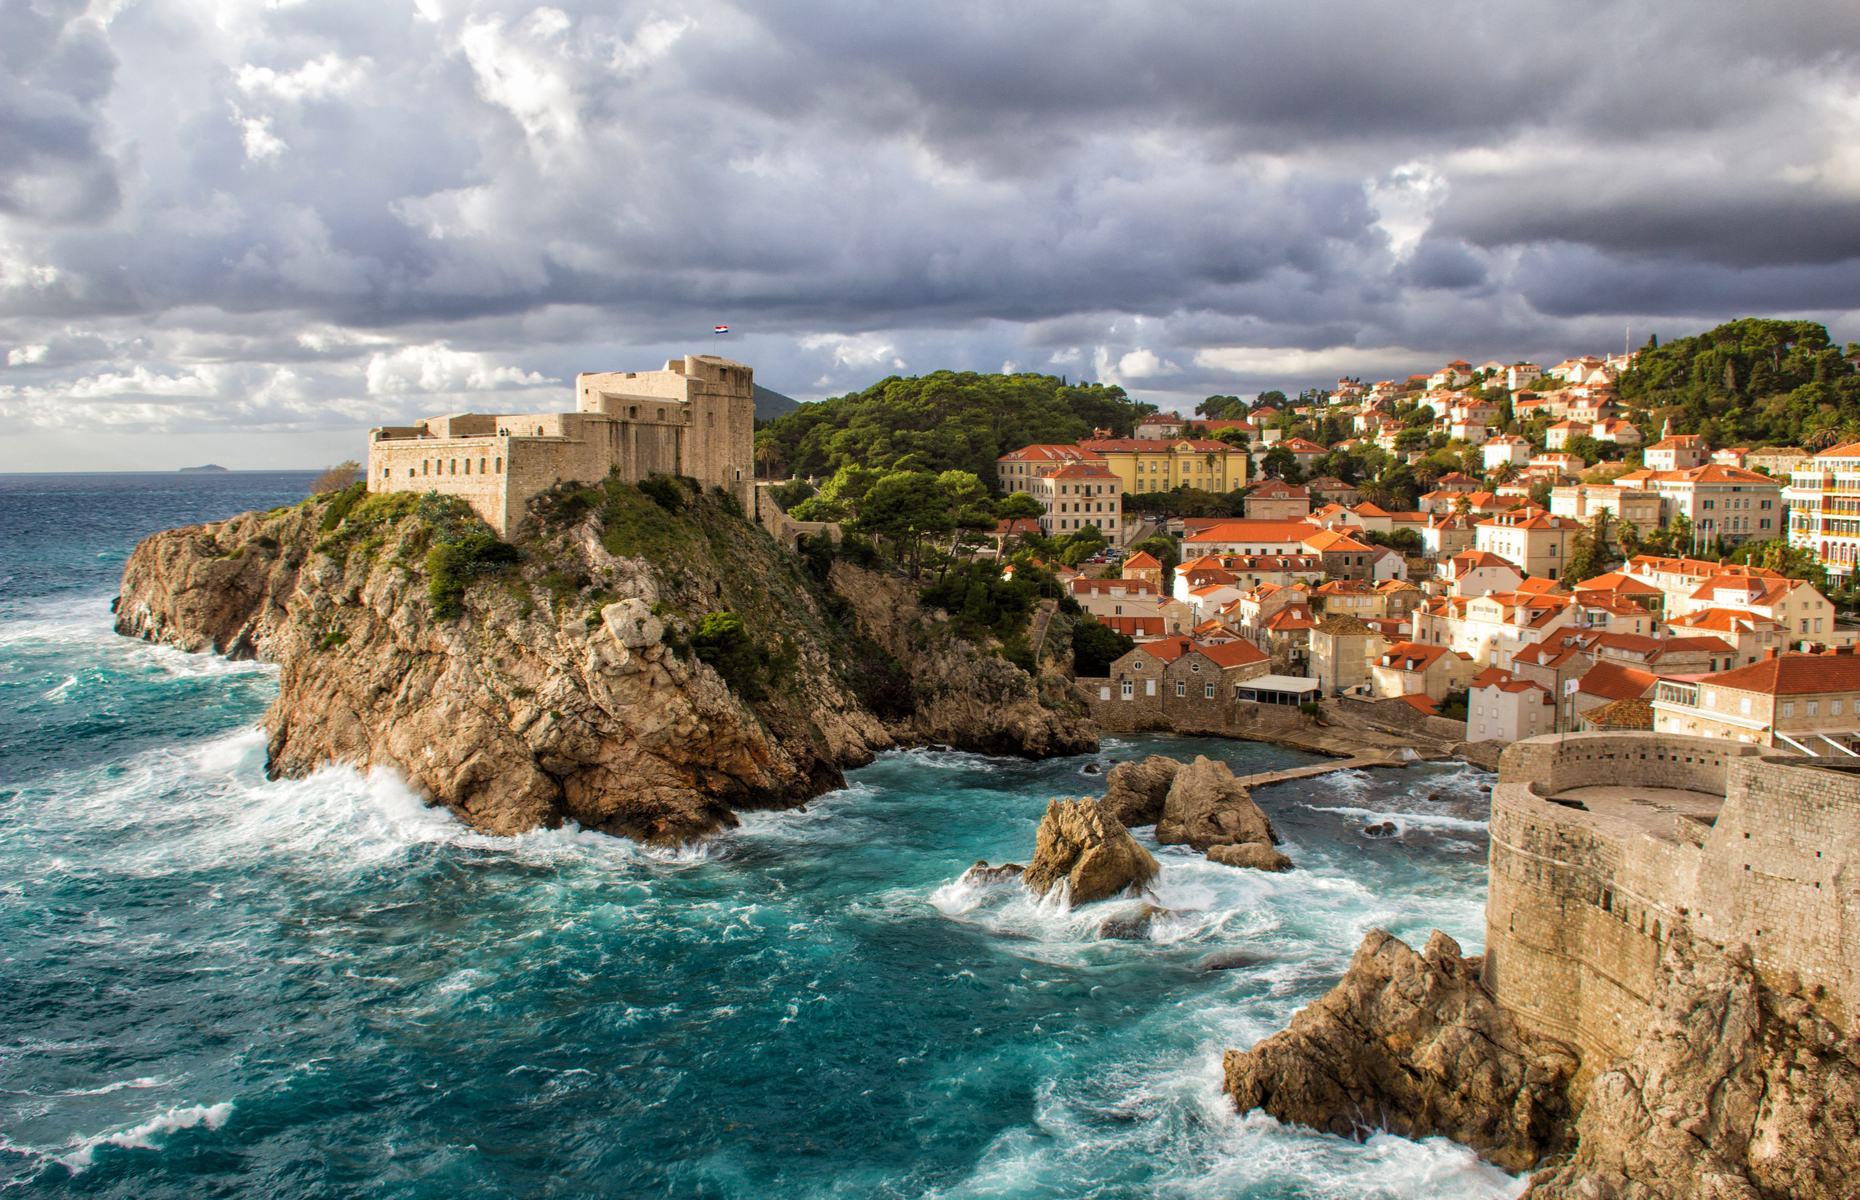 <p>It’s easy to see why the ancient city of Dubrovnik was used as a filming location for fantasy TV series <em>Game of Thrones</em>. With its intricate limestone streets and buildings perched on craggy cliffs, the Adriatic coast gem needs no special effects to look like a fantasy world. The city’s Baroque buildings were completed by the 13th century, although they have undergone two major restorations since: firstly, after a catastrophic earthquake in 1667, and secondly, after shelling during the Yugoslav Wars in the early 1990s.</p>  <p><strong><a href="https://www.loveexploring.com/galleries/103353/the-worlds-most-beautiful-walled-towns-and-cities?page=1">Now check out the world's most beautiful walled towns and cities</a></strong></p>